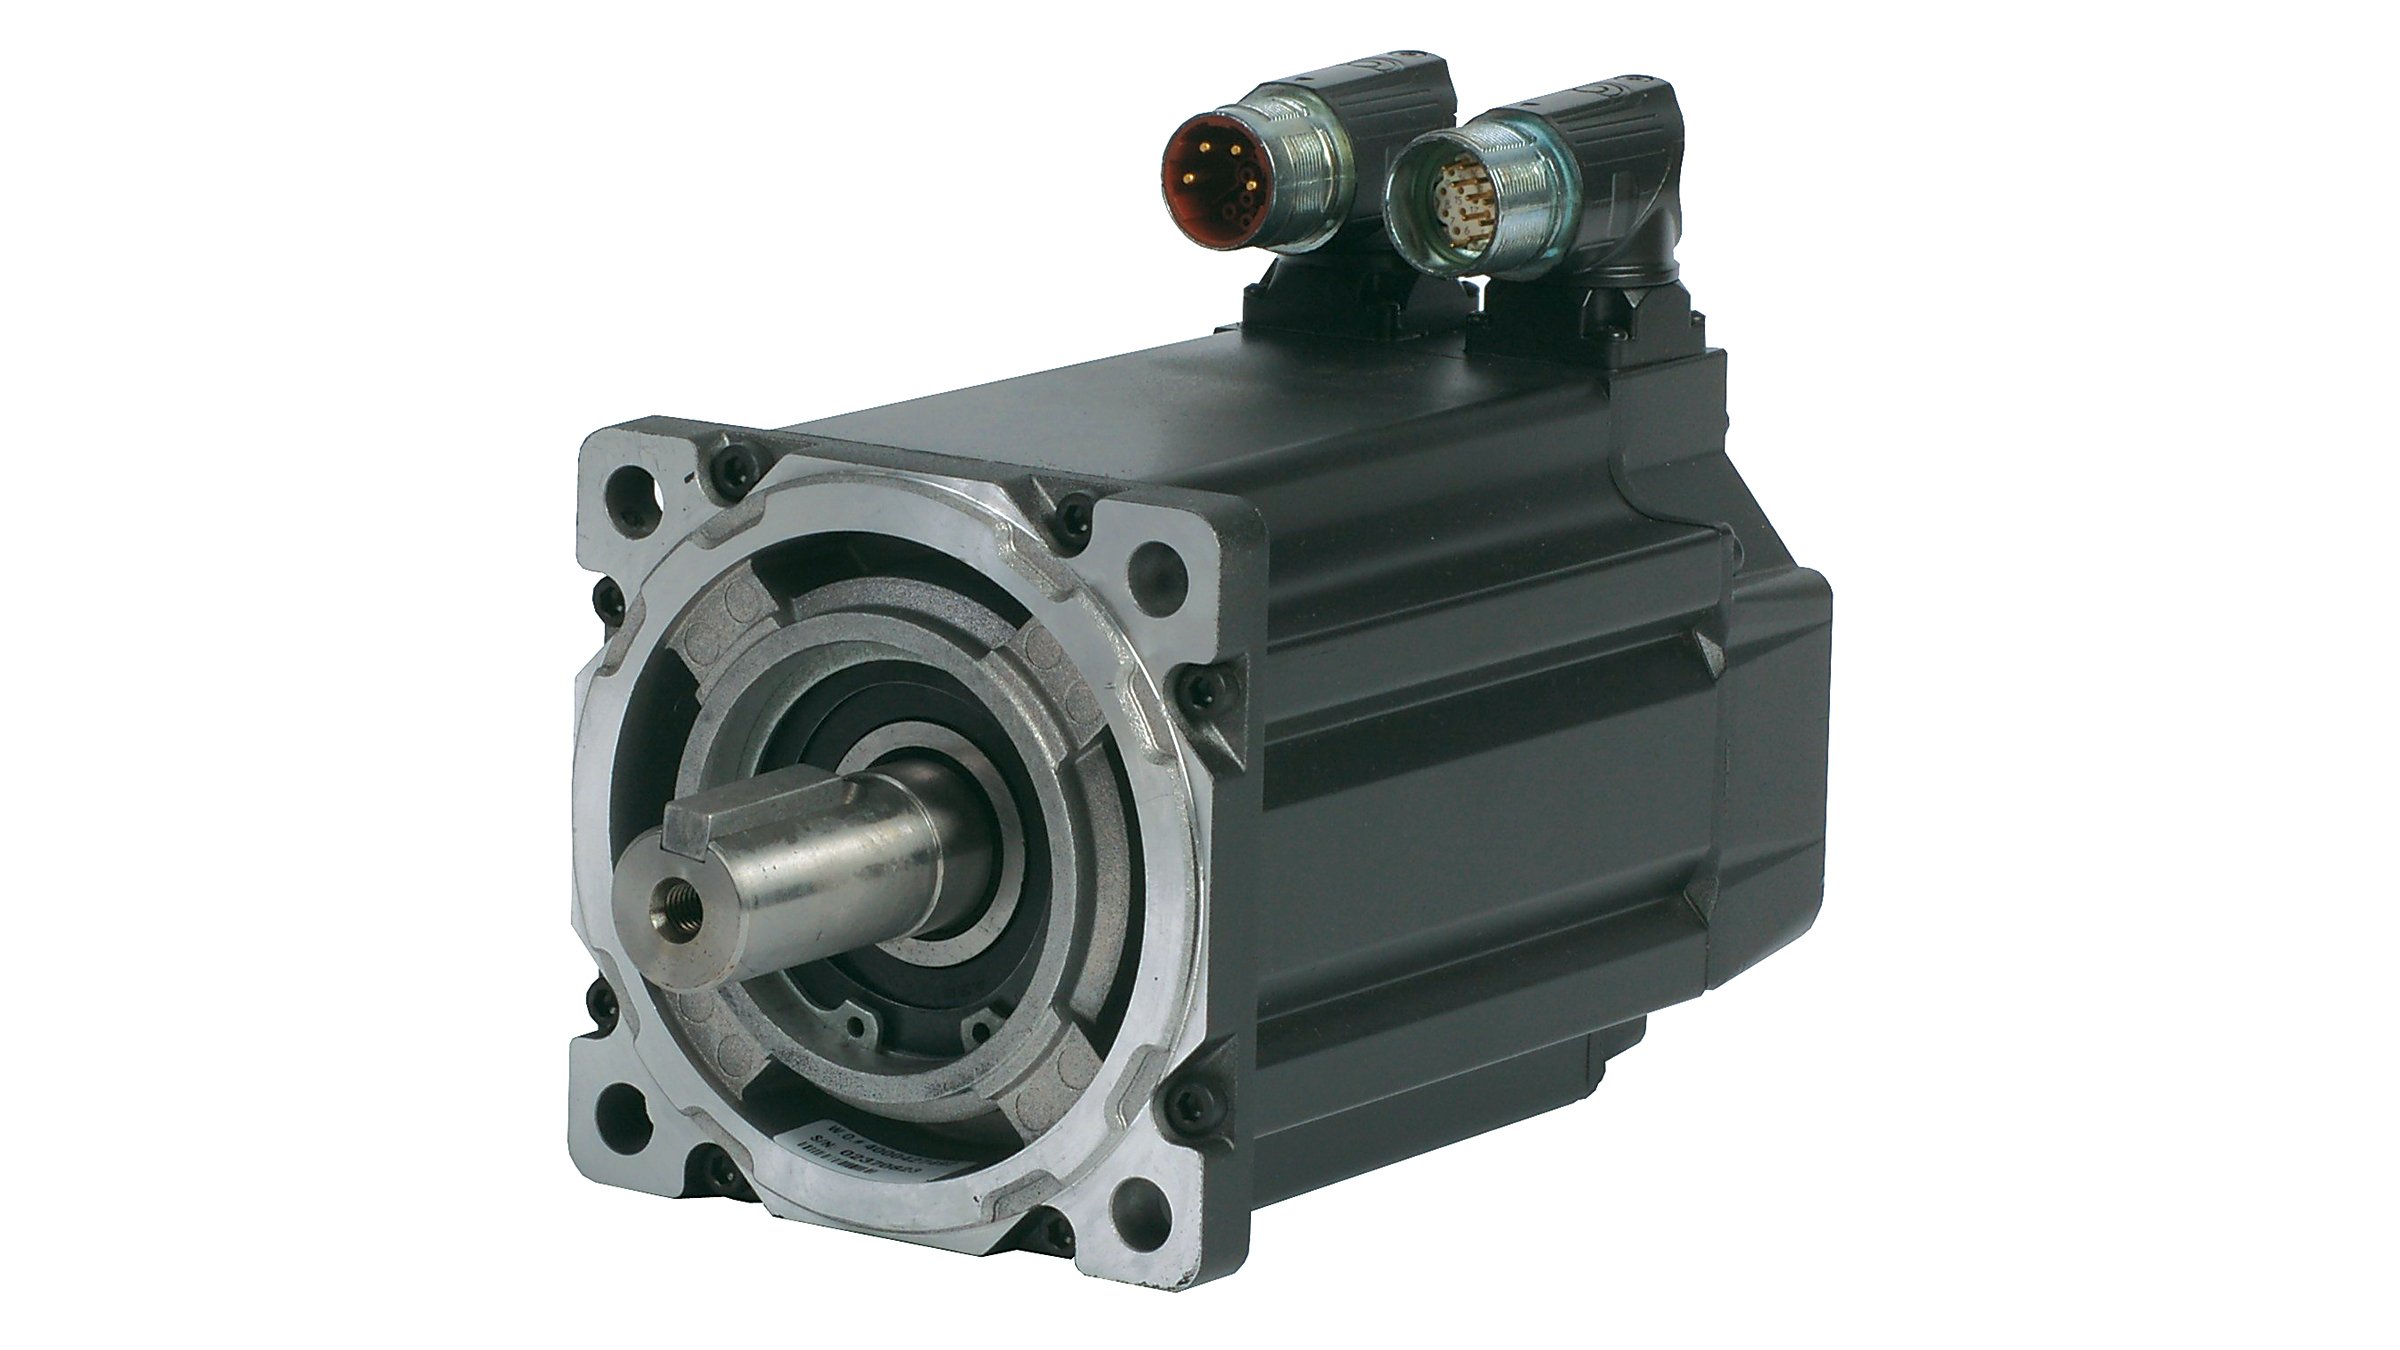 Allen‑Bradley MP-Series™ Medium Inertia (MPM) Servo Motors offer IEC metric mounting dimensions and rotatable DIN connectors that provide flexible connector orientation for ease of cable routing.